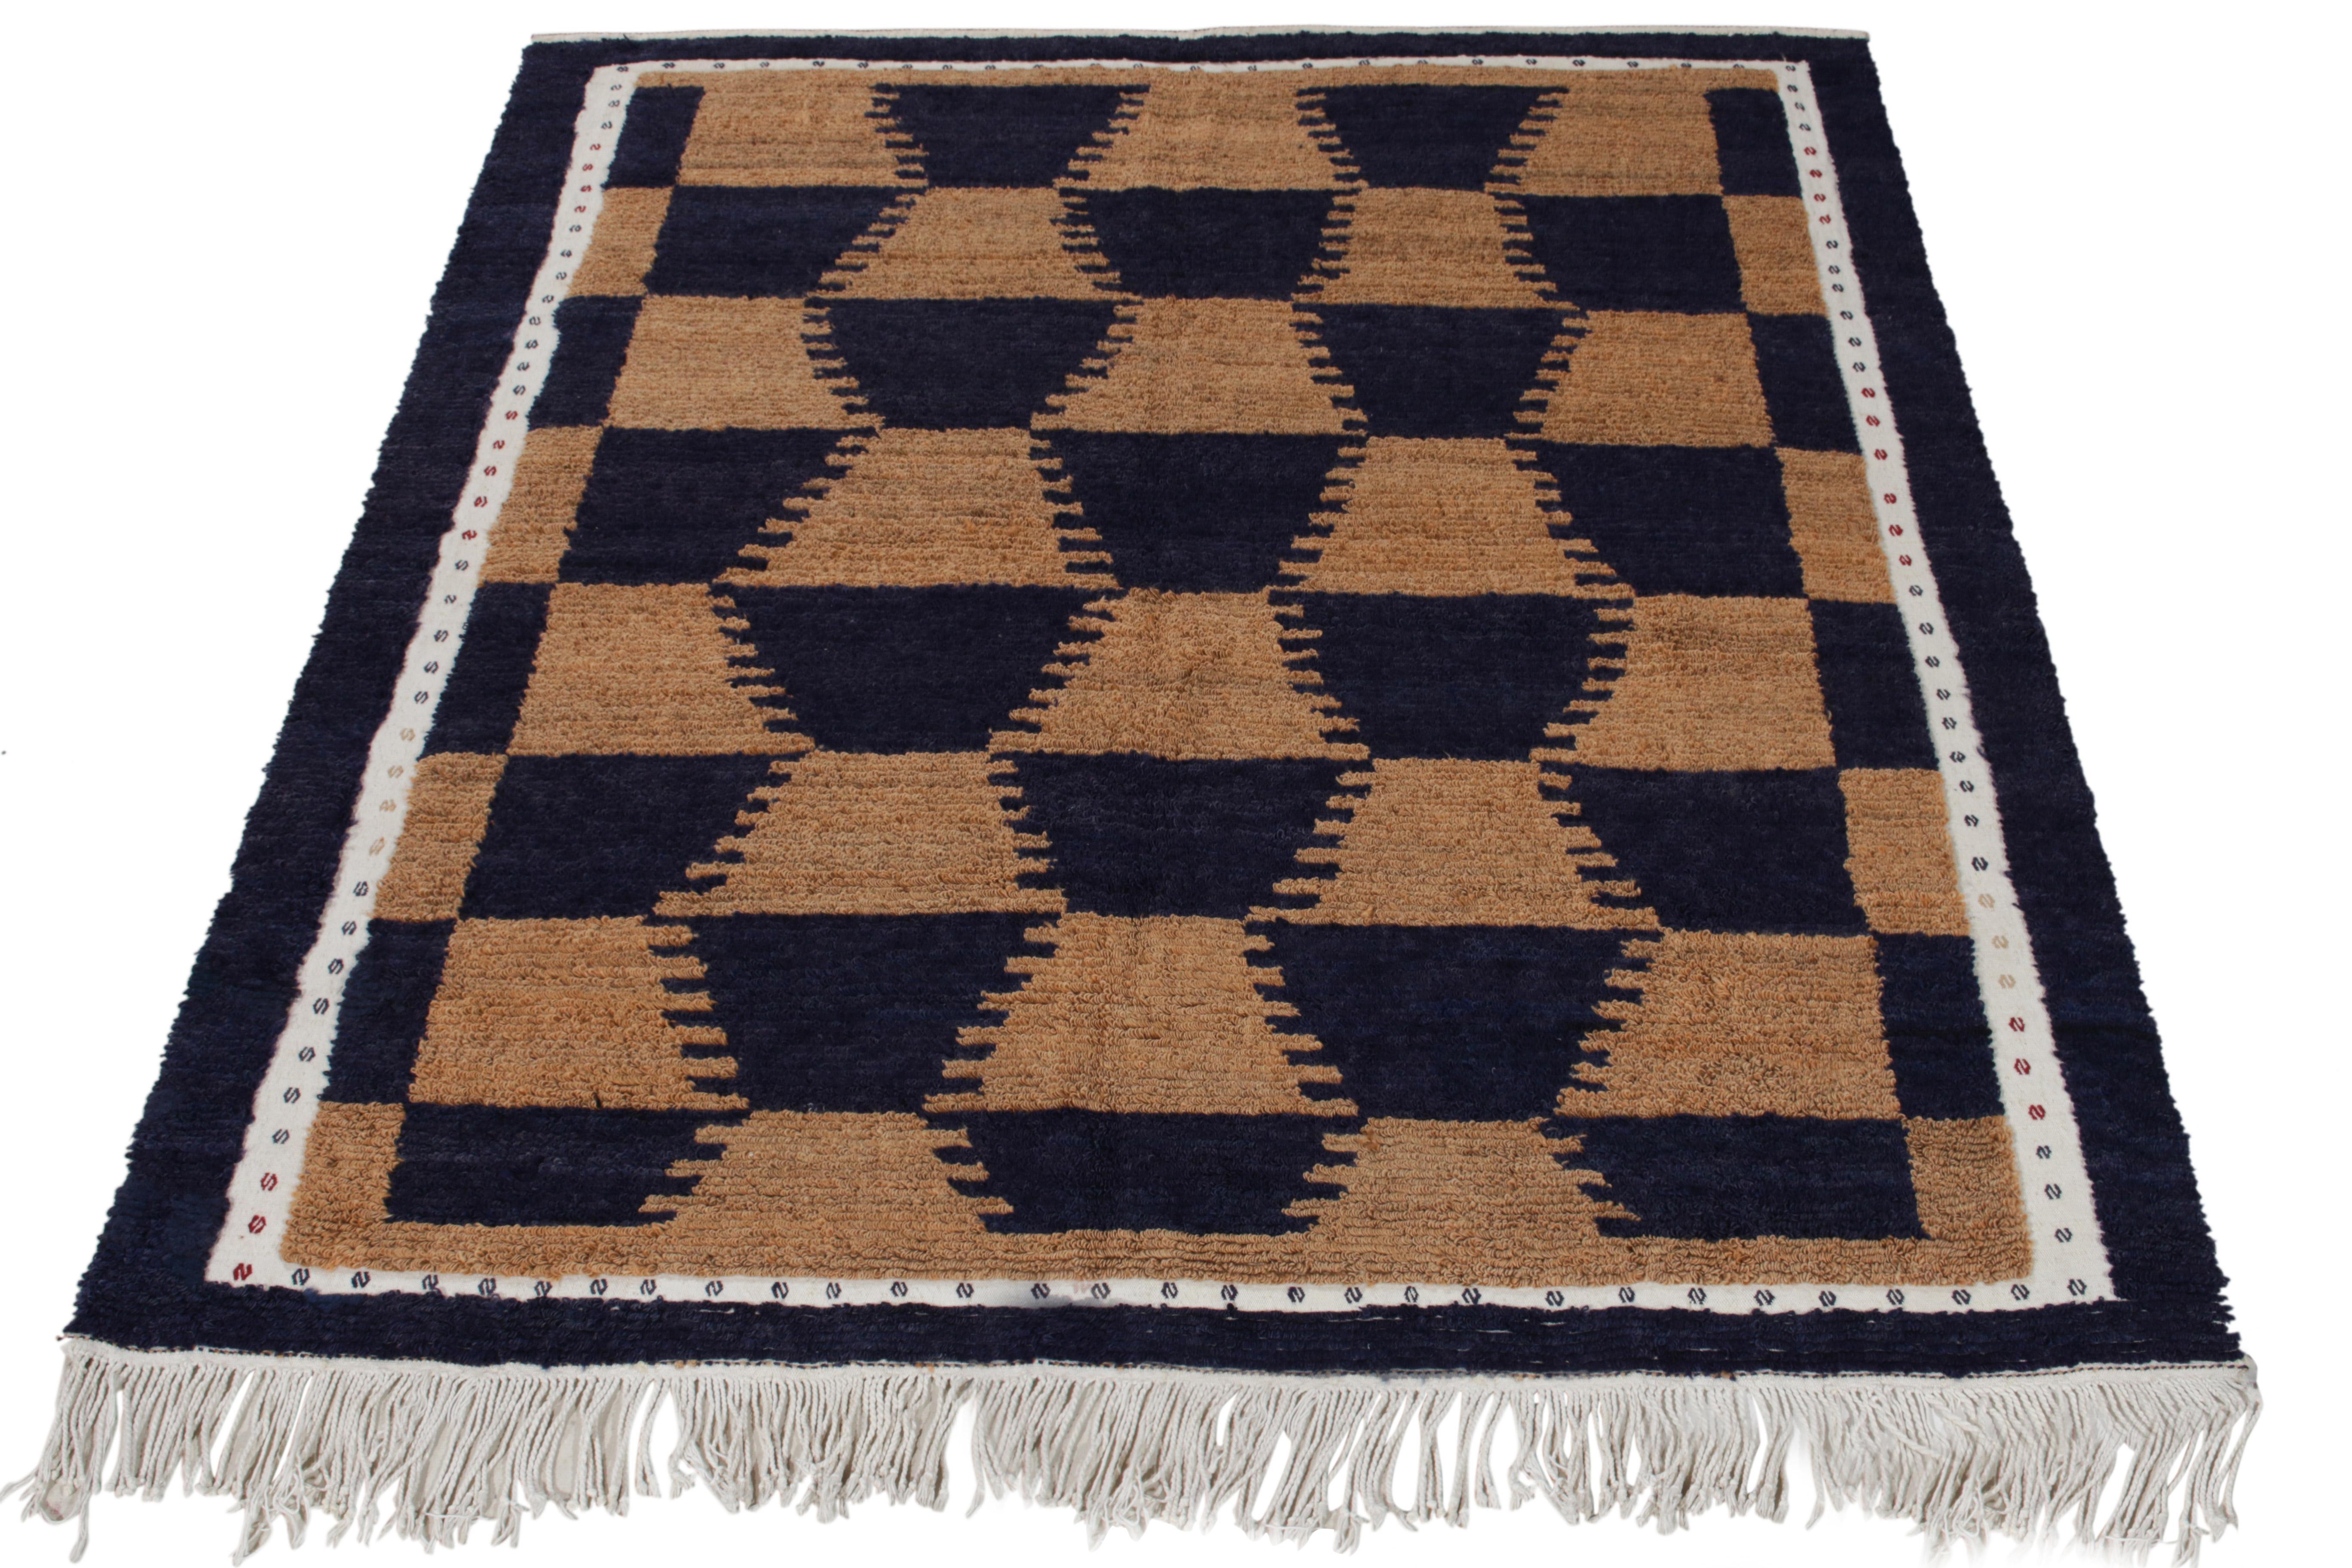 This rare pair of vintage 6x7 Tulu rugs are the next addition to Rug & Kilim’s Antique & Vintage collection. Both are hand-knotted in wool, and originate circa 1950-1960 from Turkey.

Further on the Design: 

Both pieces enjoy chic geometry in